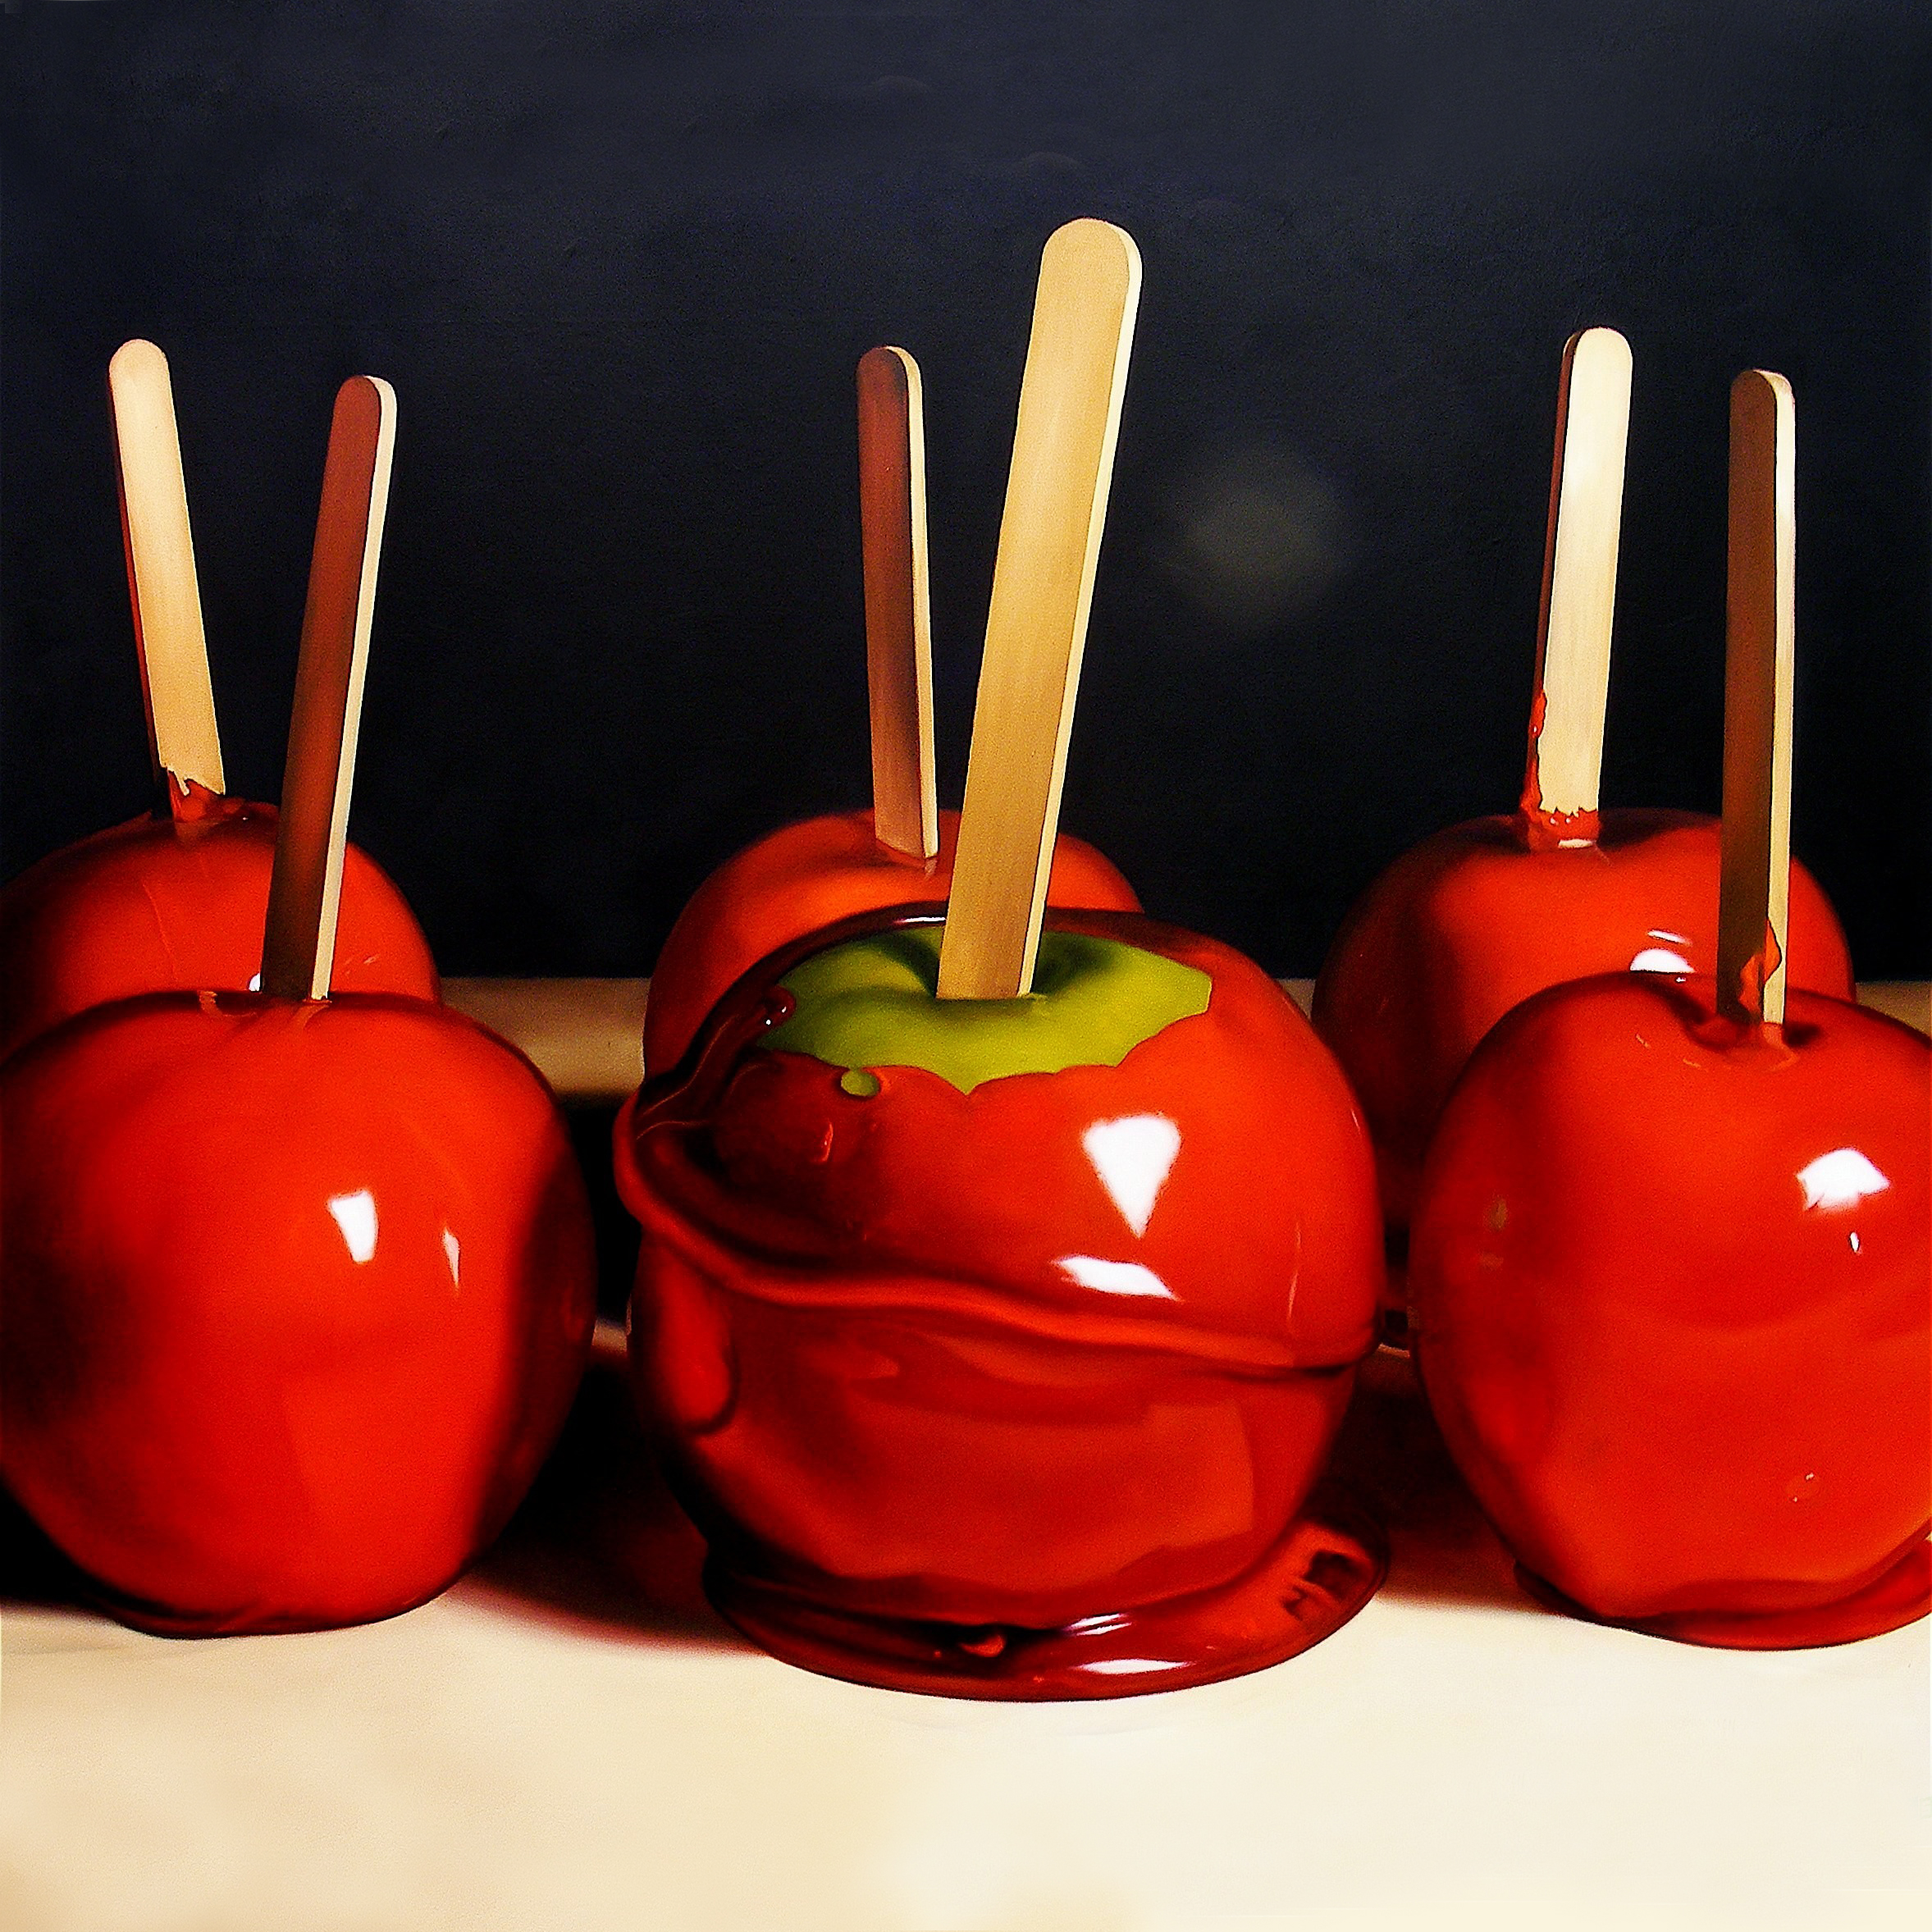 https://cdn11.bigcommerce.com/s-c02ce/product_images/uploaded_images/candy-apple-red.jpg